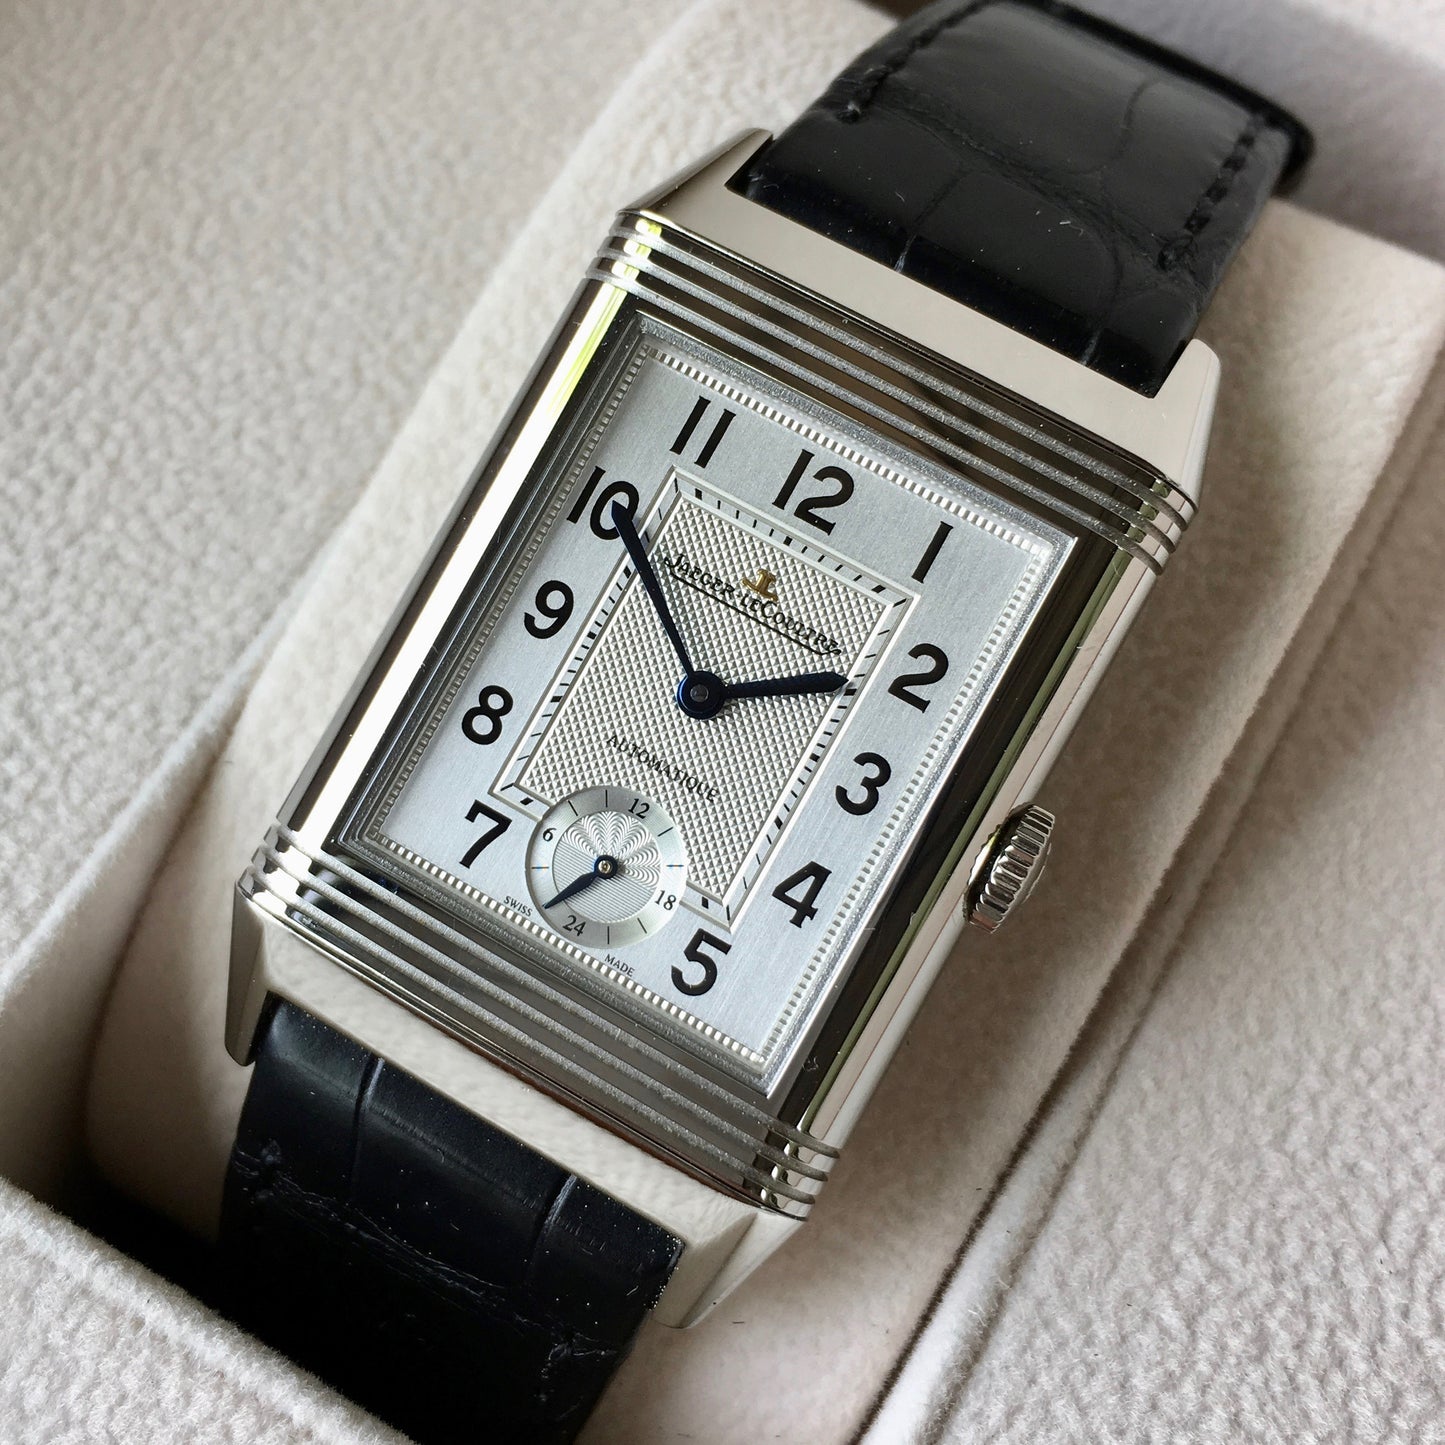 Jaeger LeCoultre Grande Reverso Day & Night Automatique Q3808420 278.8.56 Watch - Hashtag Watch Company